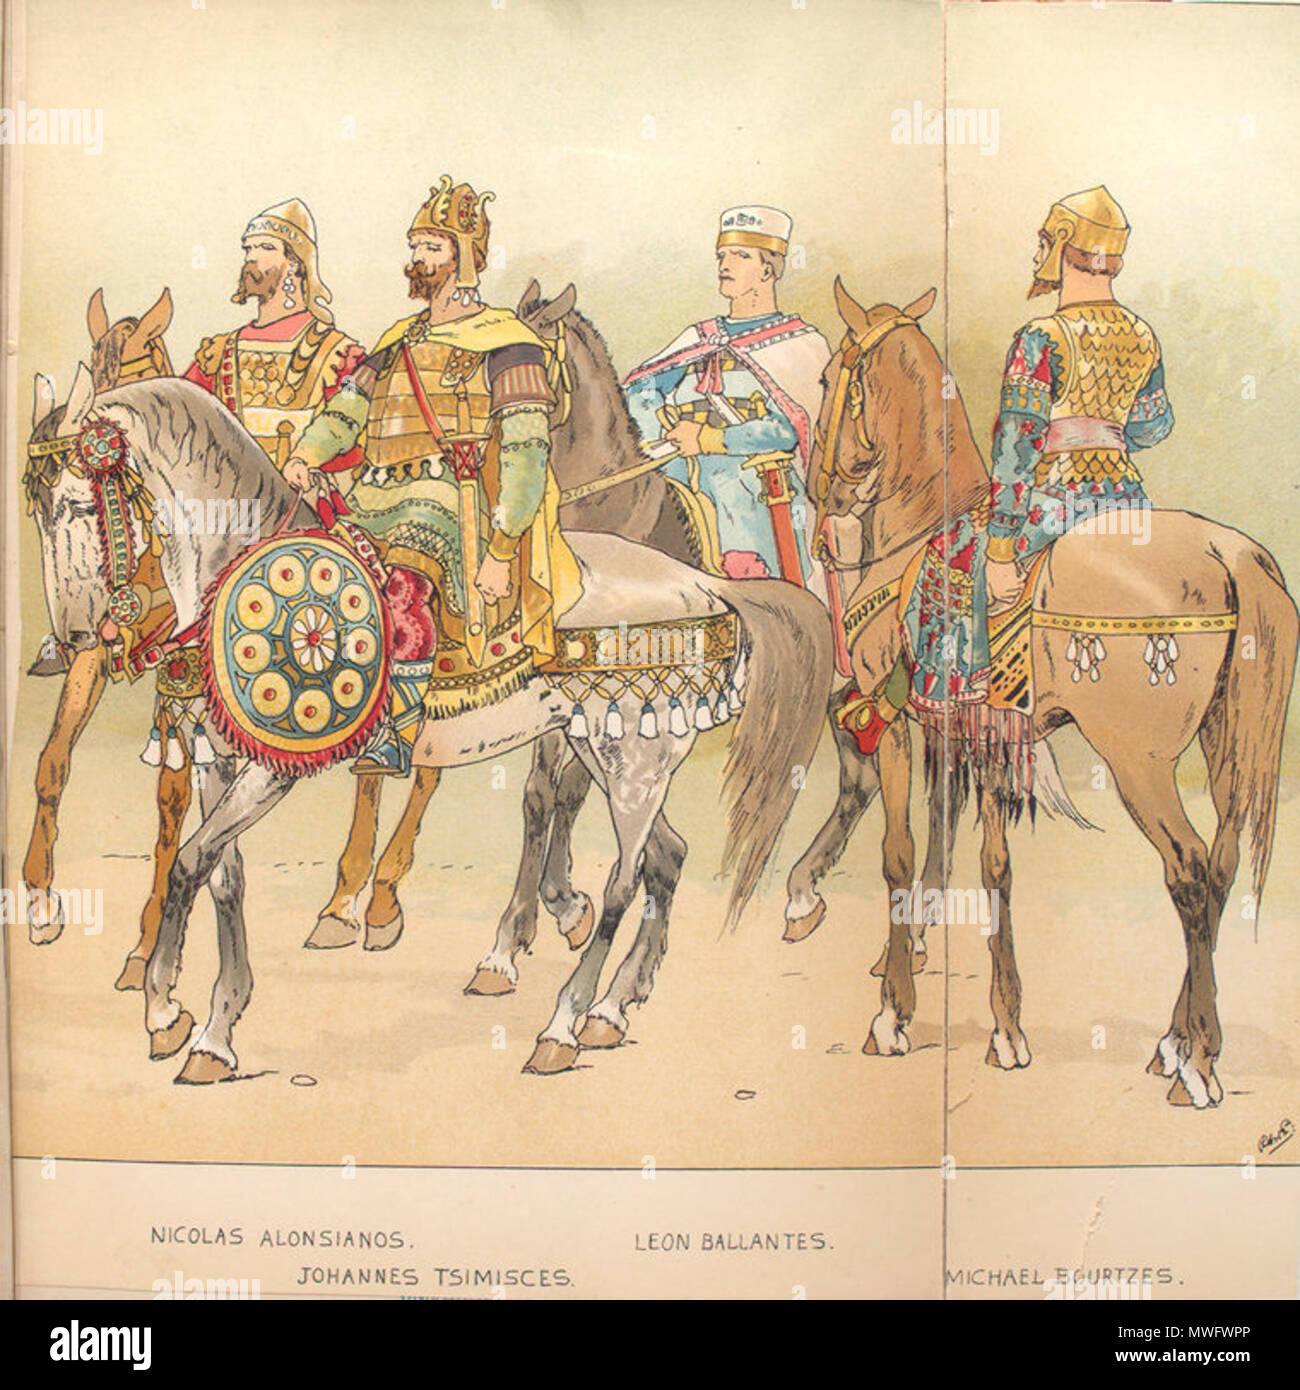 . Fanciful ahistorical representation of several notable 10th-century Byzantine generals: Nicolas Alonsianos, Johannes Tsimisces, Leon Ballantes, Michael Bourtzes. Drawing from Vinkhuijzen Collection of Military Costume Illustration. before 1910. The collection assembled by H. J. Vinkhuijzen (1843-1910). See: [2] 319 Johannes Tsimisces Vinkhuijzen Stock Photo